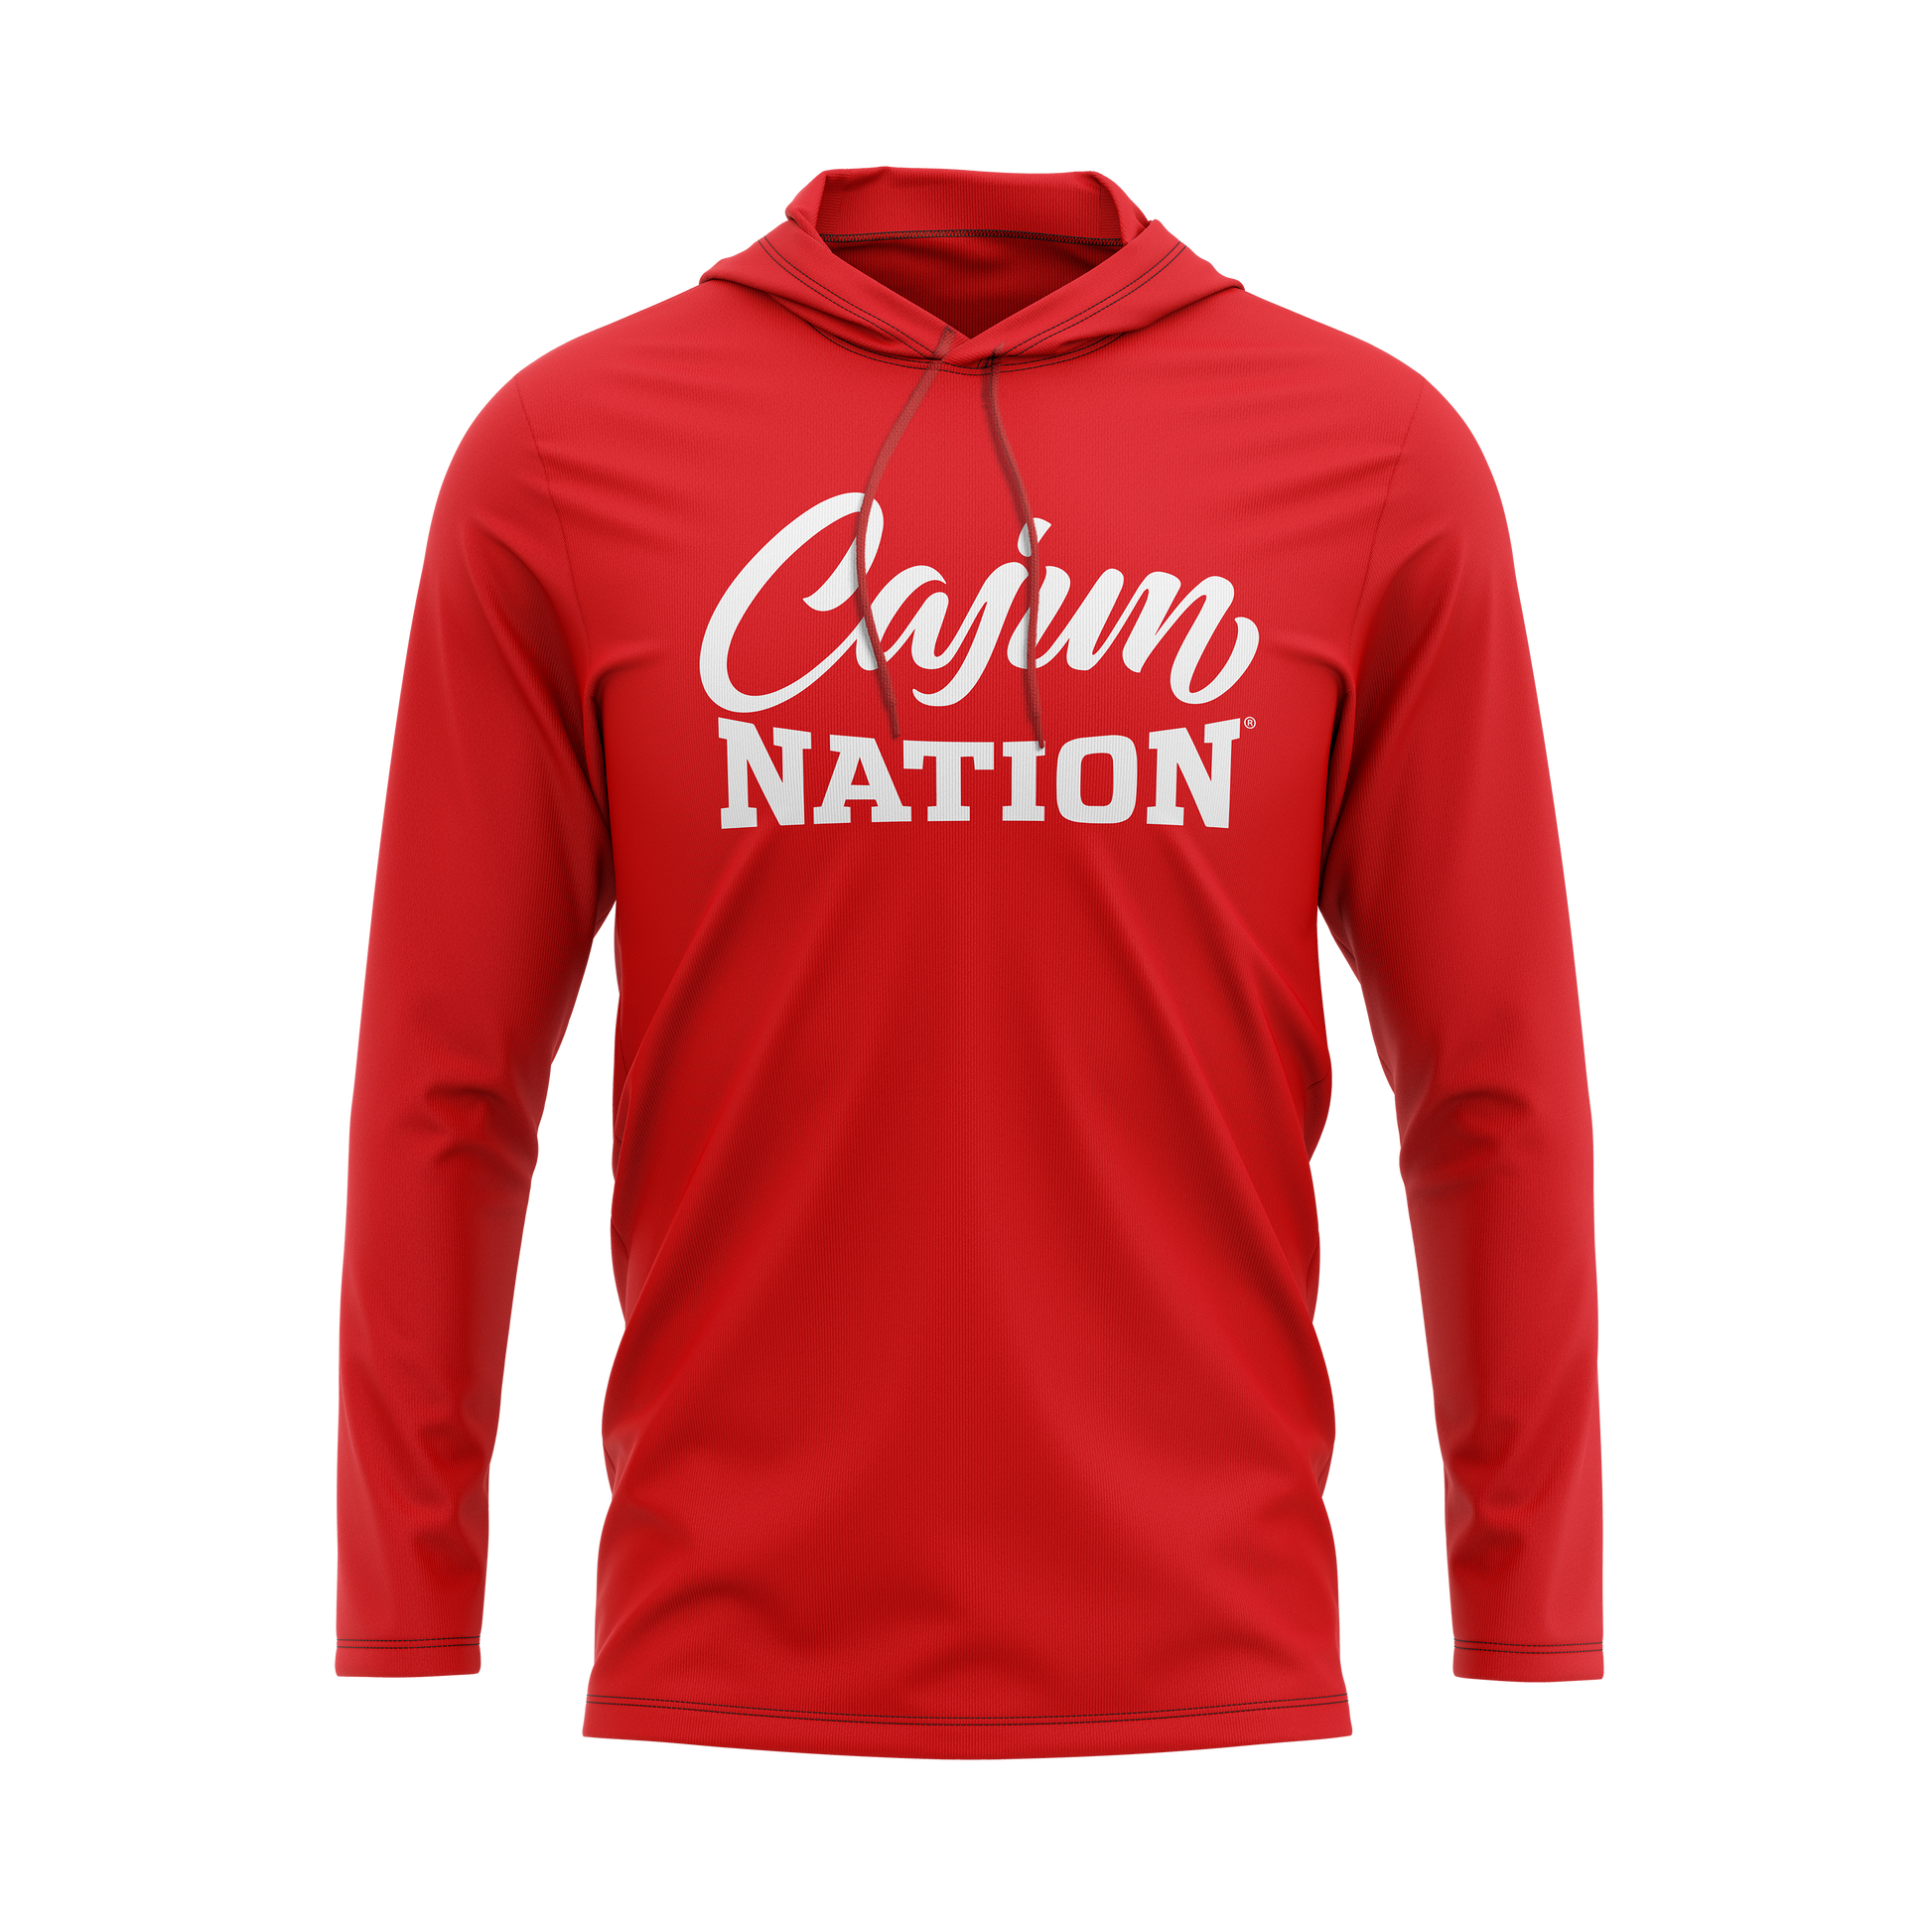 Cajun Nation Red Lightweight Classic Pullover Hoodie  - 4.3 oz., 100% combed ring spun cotton, 32 singles Heather colors are 65/35 polyester/ring spun cotton Relaxed unlined hood with contrast draw cord Double-needle neck, sleeve and bottom hem Tubular construction Plastisol print